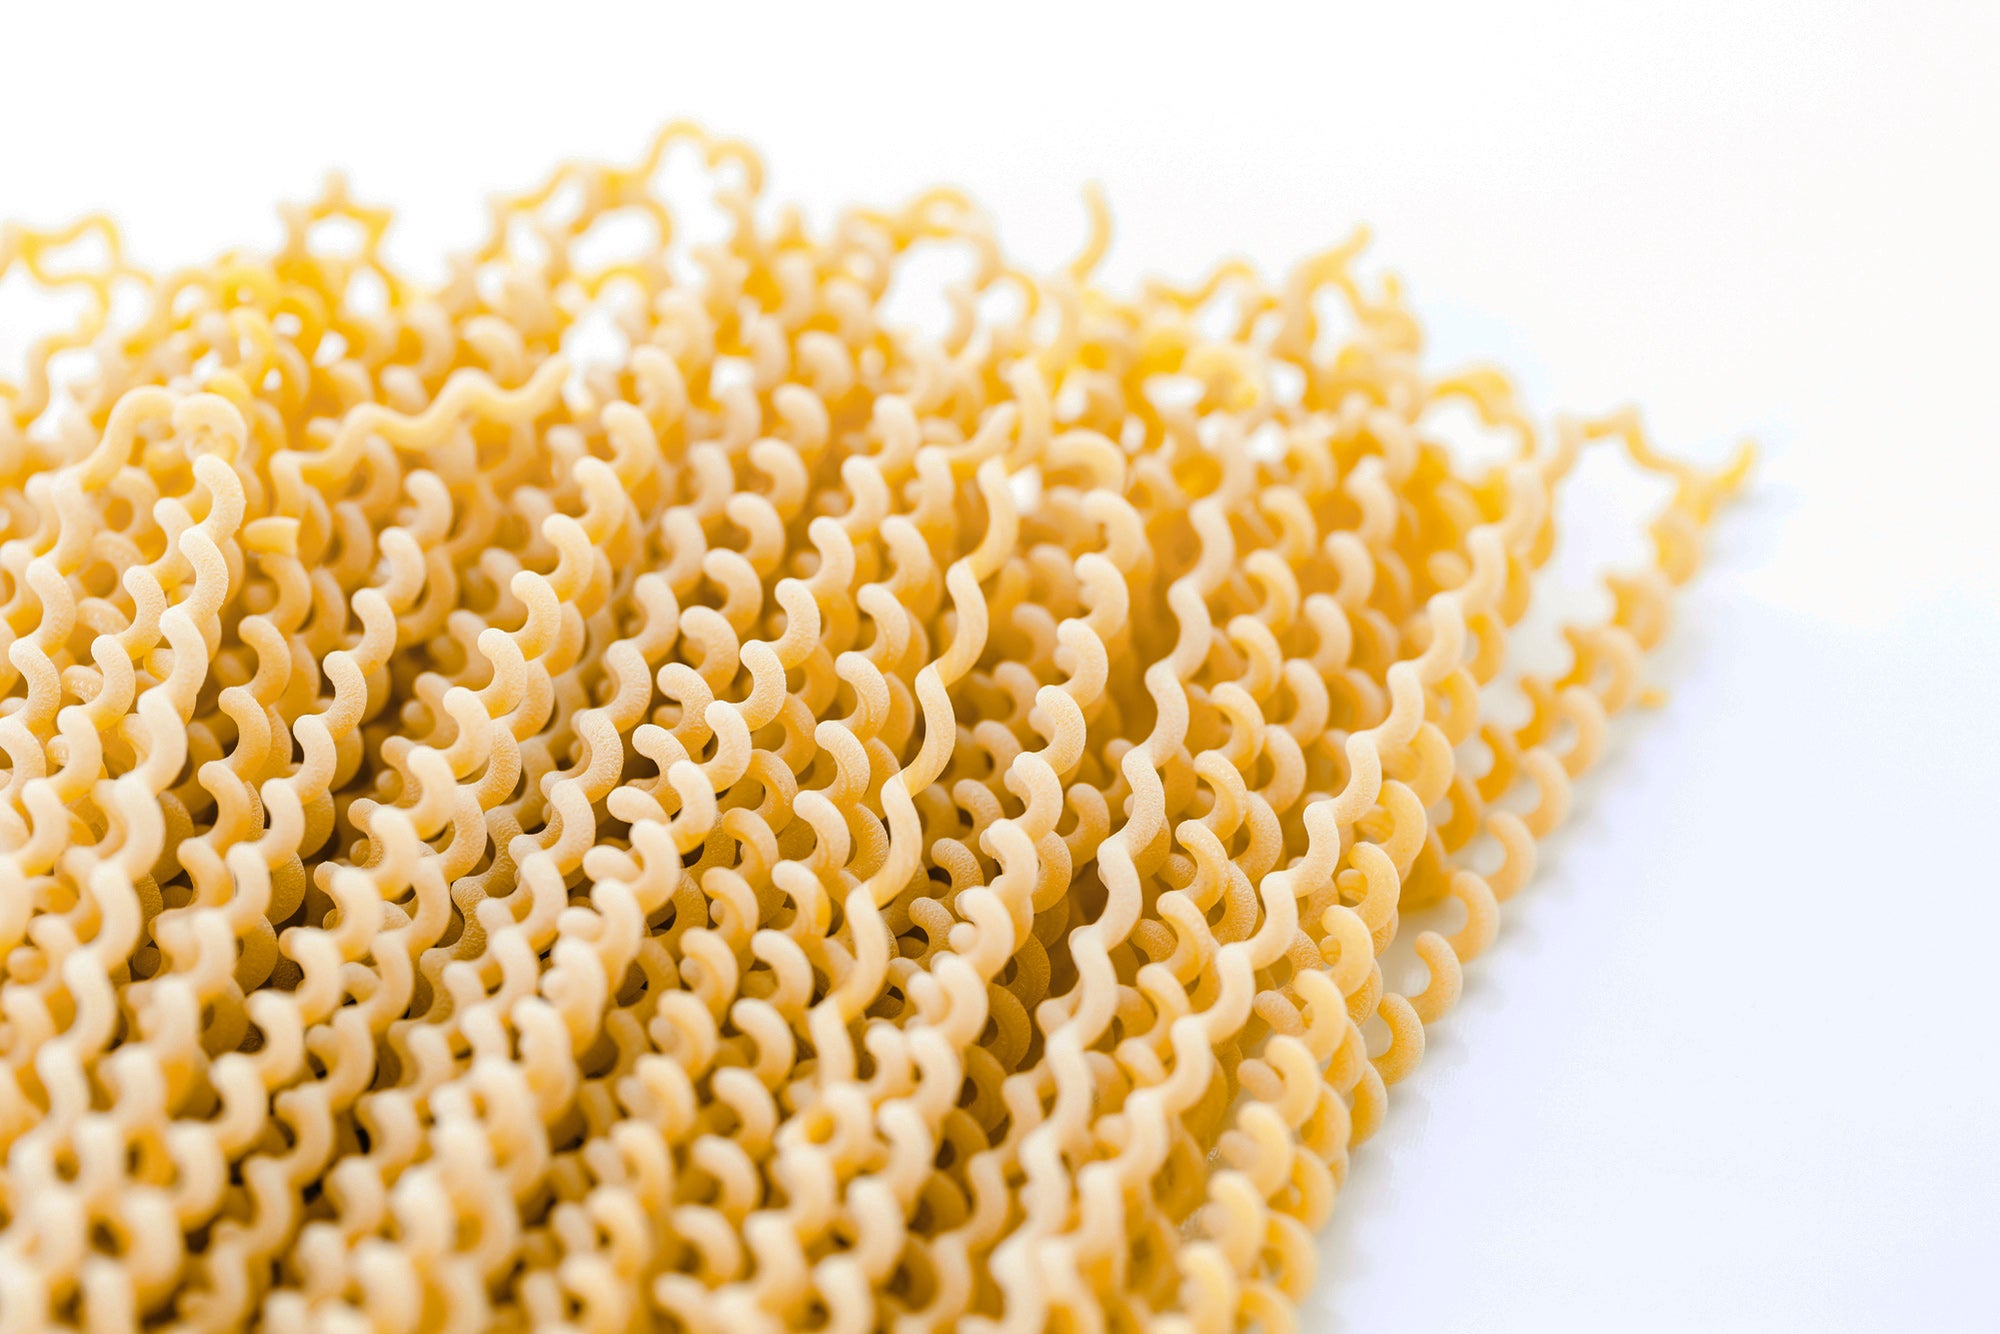 A guide to the pasta shapes of Italy